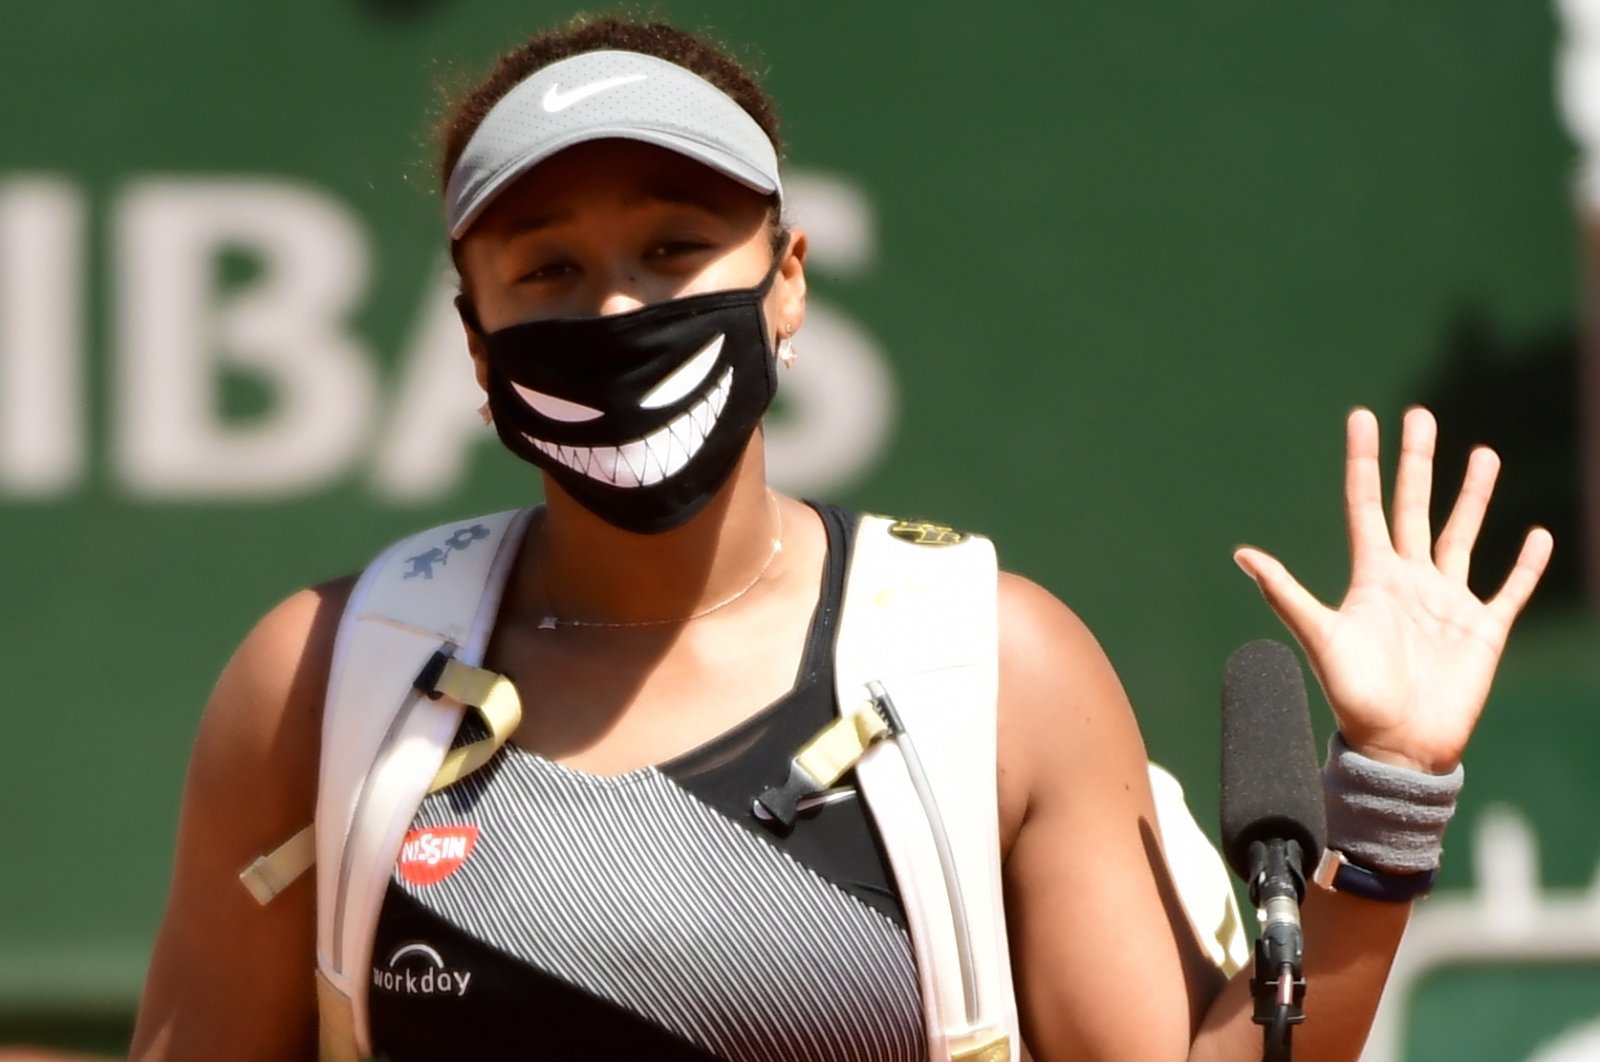 Naomi Osaka of Japan celebrates winning against Patricia Maria Tig of Romania during their first round match at the French Open tennis tournament at Roland ​Garros in Paris, France, May 30, 2021. (EPA Photo)